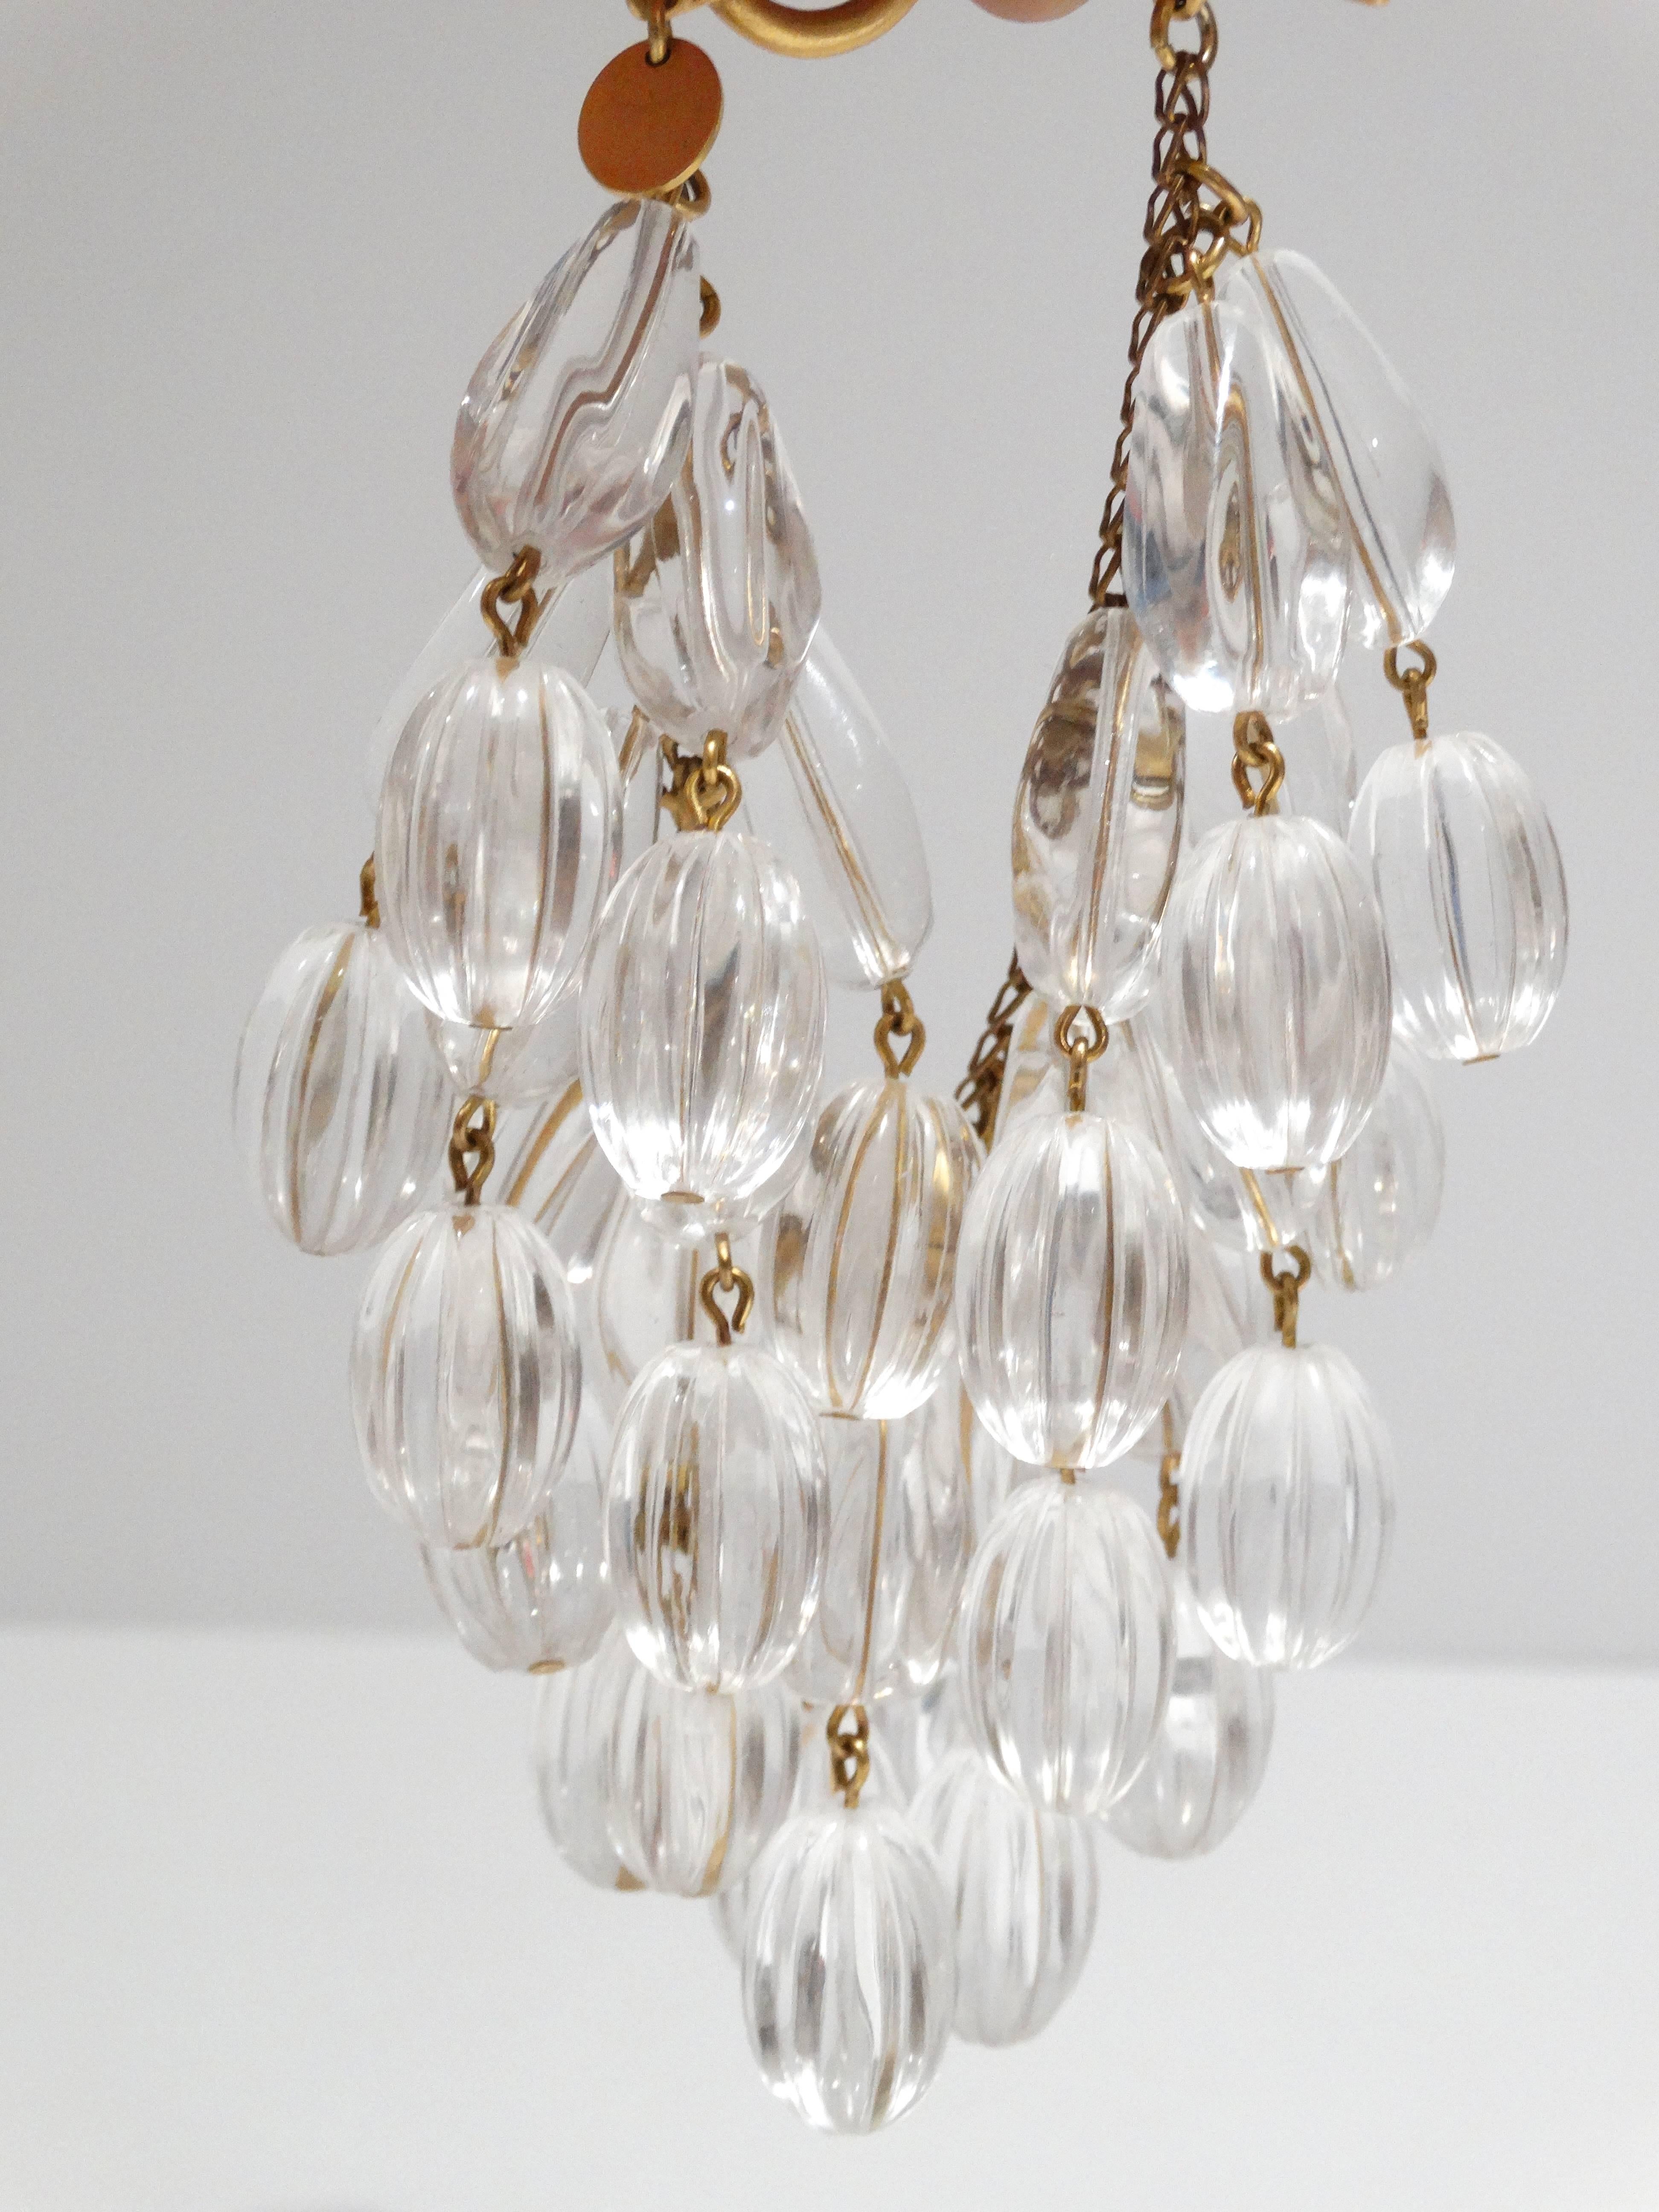 1980's ANNE KLEIN COUTURE Clear lucite carved beads and Gold-plate Metal Chain Beaded Runway Bracelet A TRUE WORK OF ART COMPOSED OF MULTIPLE STRANDS OF HUGE CARVED TEAR-SHAPED CLEAR LUCITE BEADED STRANDS (2 1/4